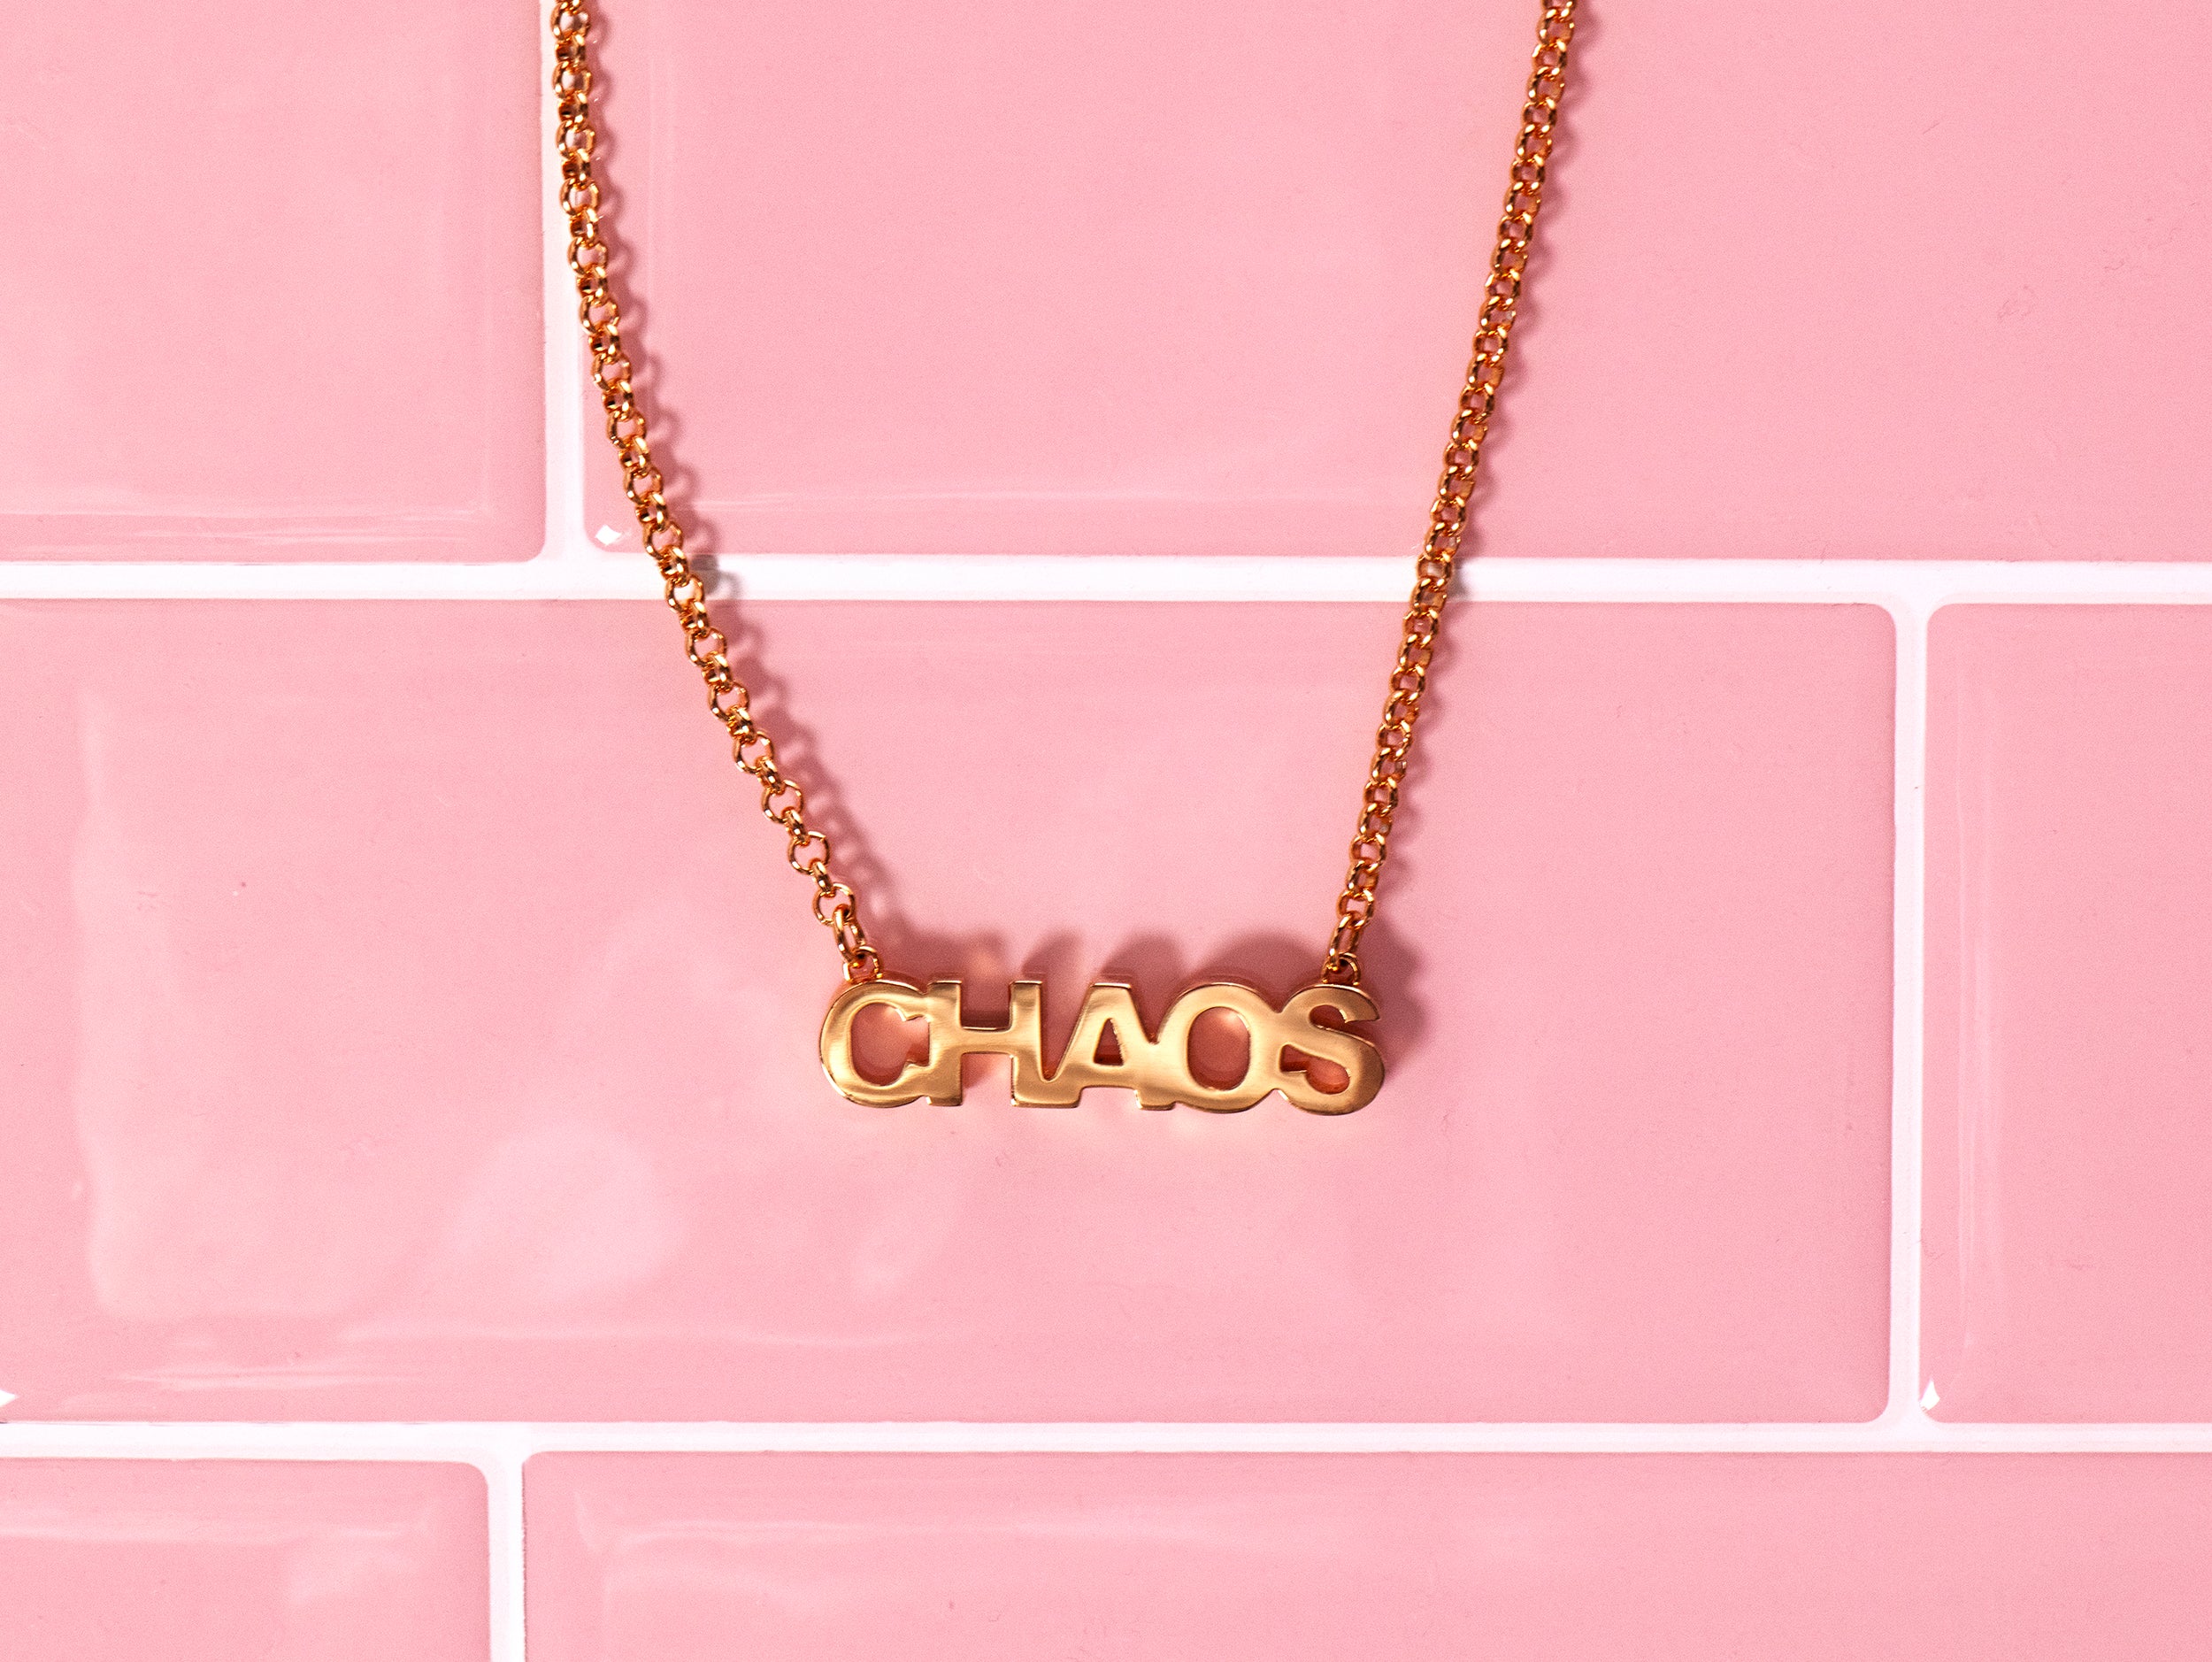 CHAOS NECKLACE - 14K SOLID GOLD